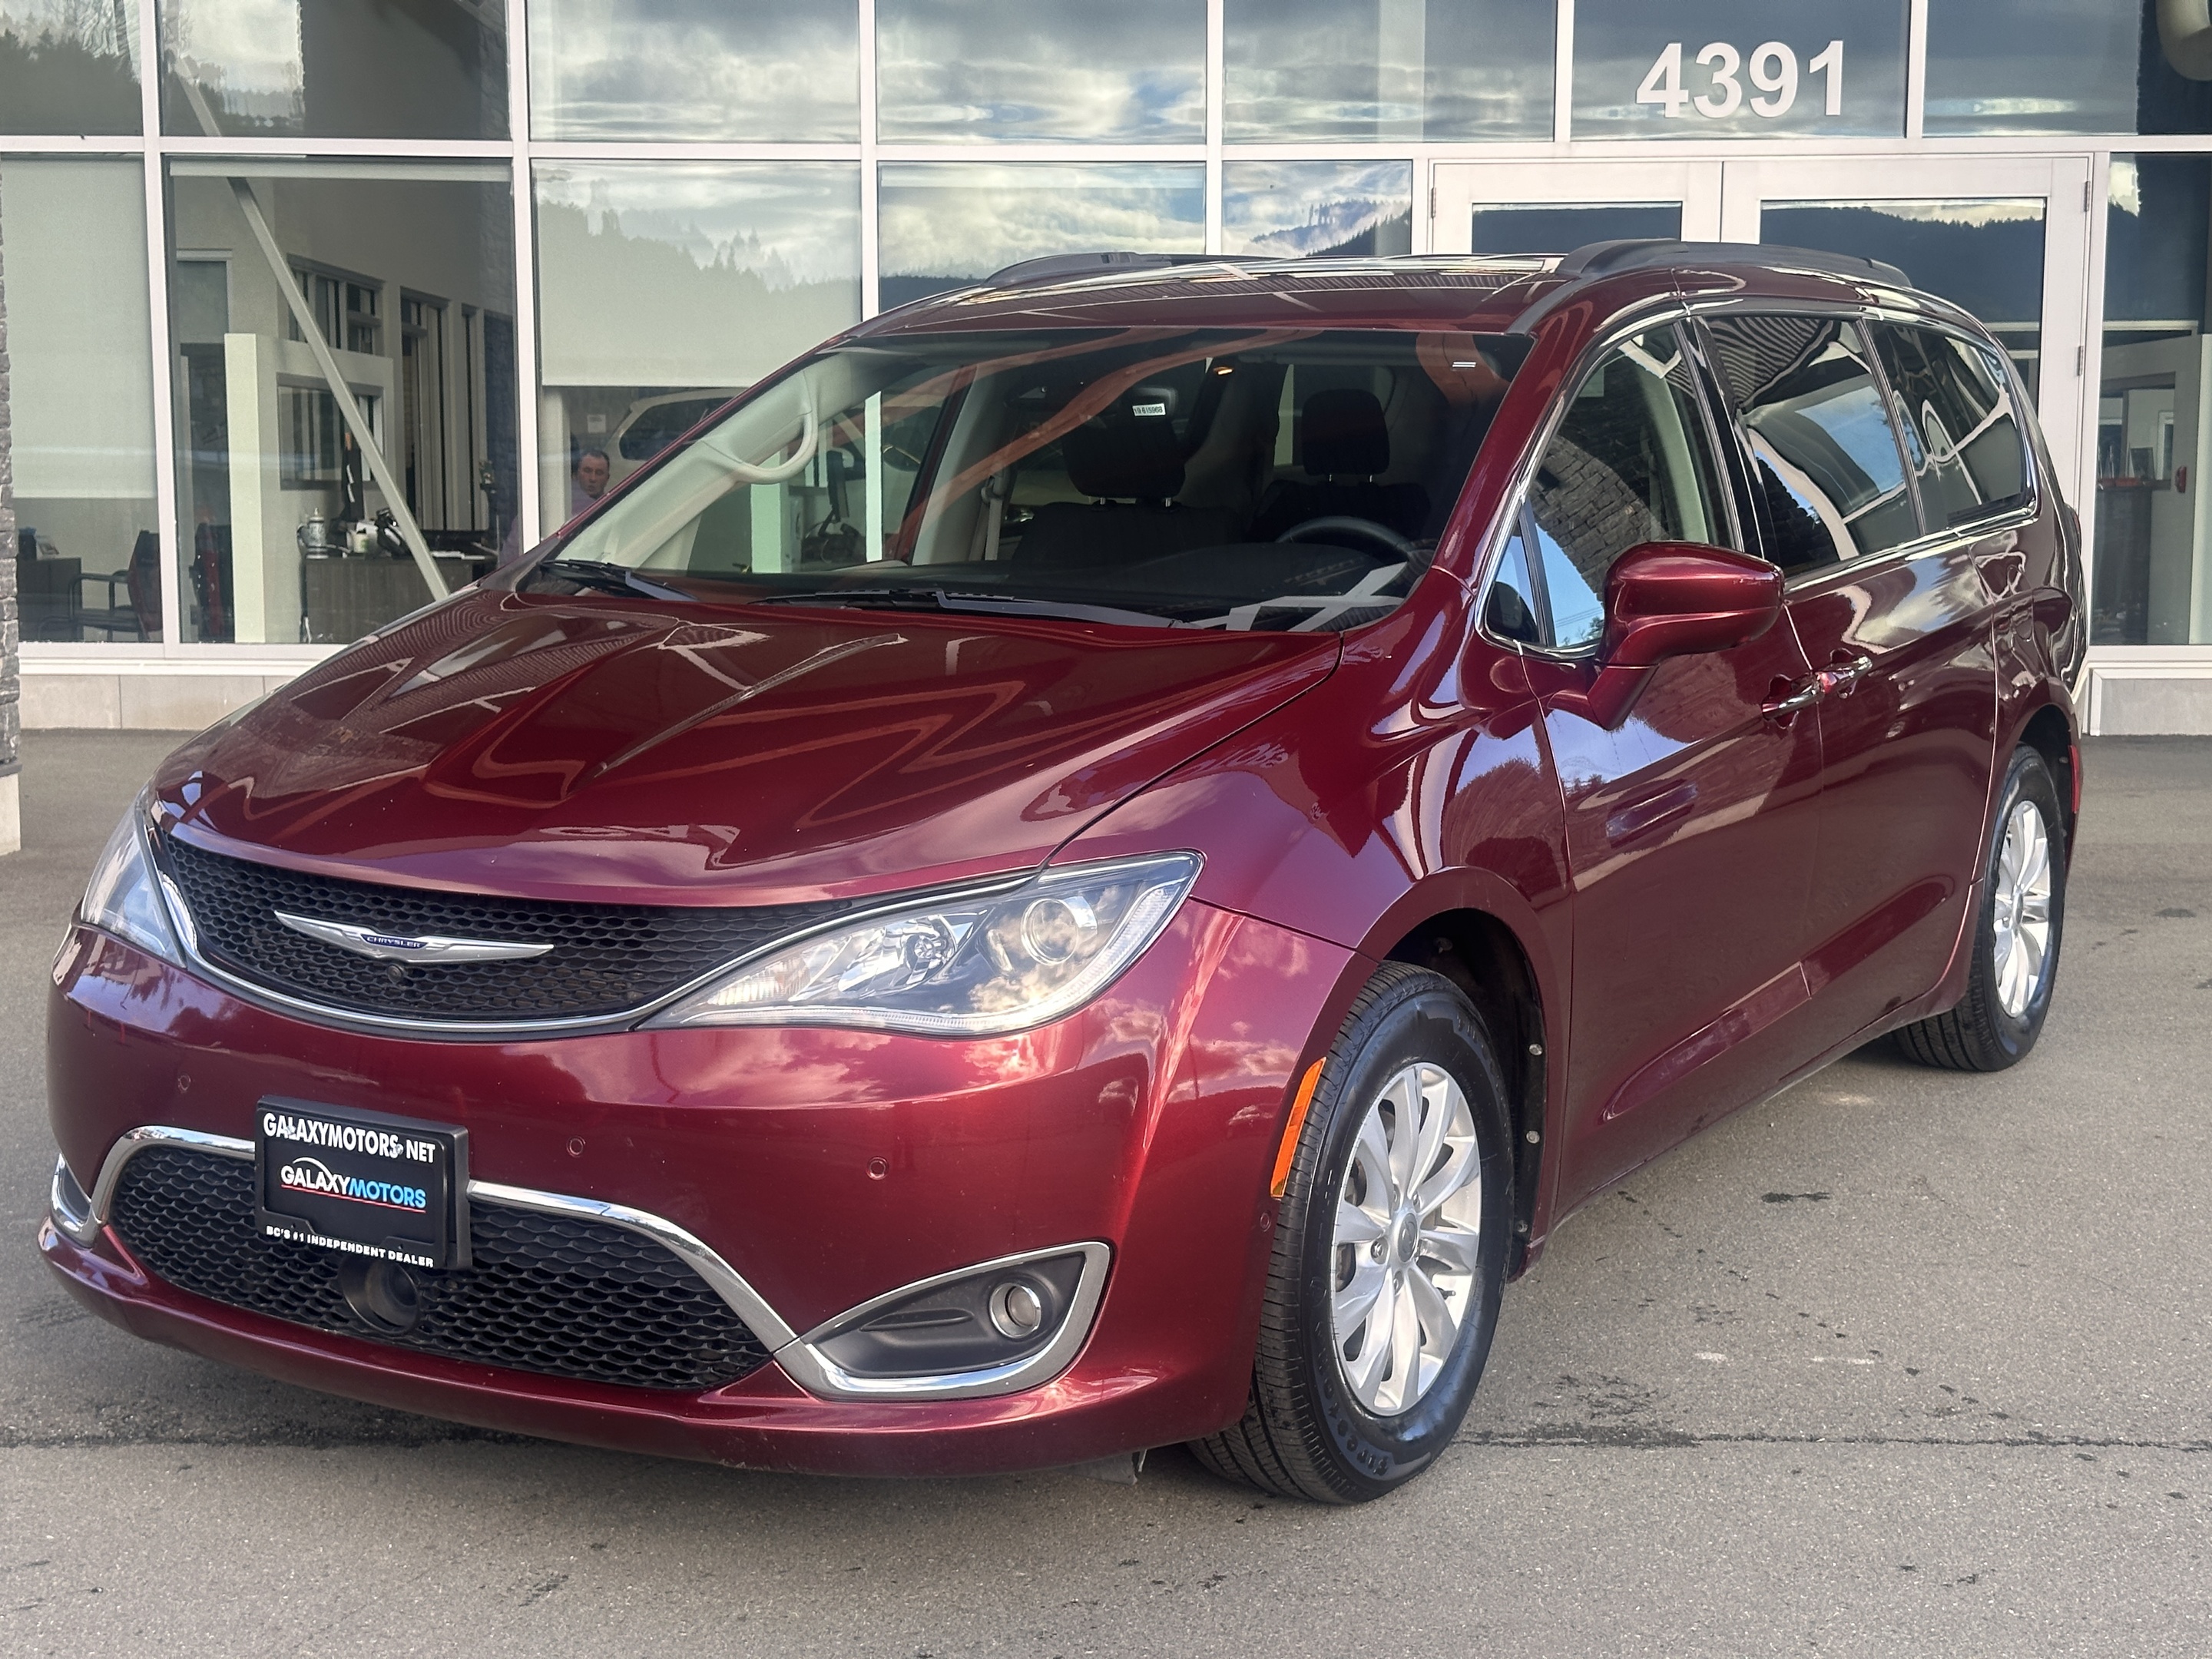 2019 Chrysler Pacifica Touring FWD-Auto,360 Surround Cams,Carplay/AA,AC